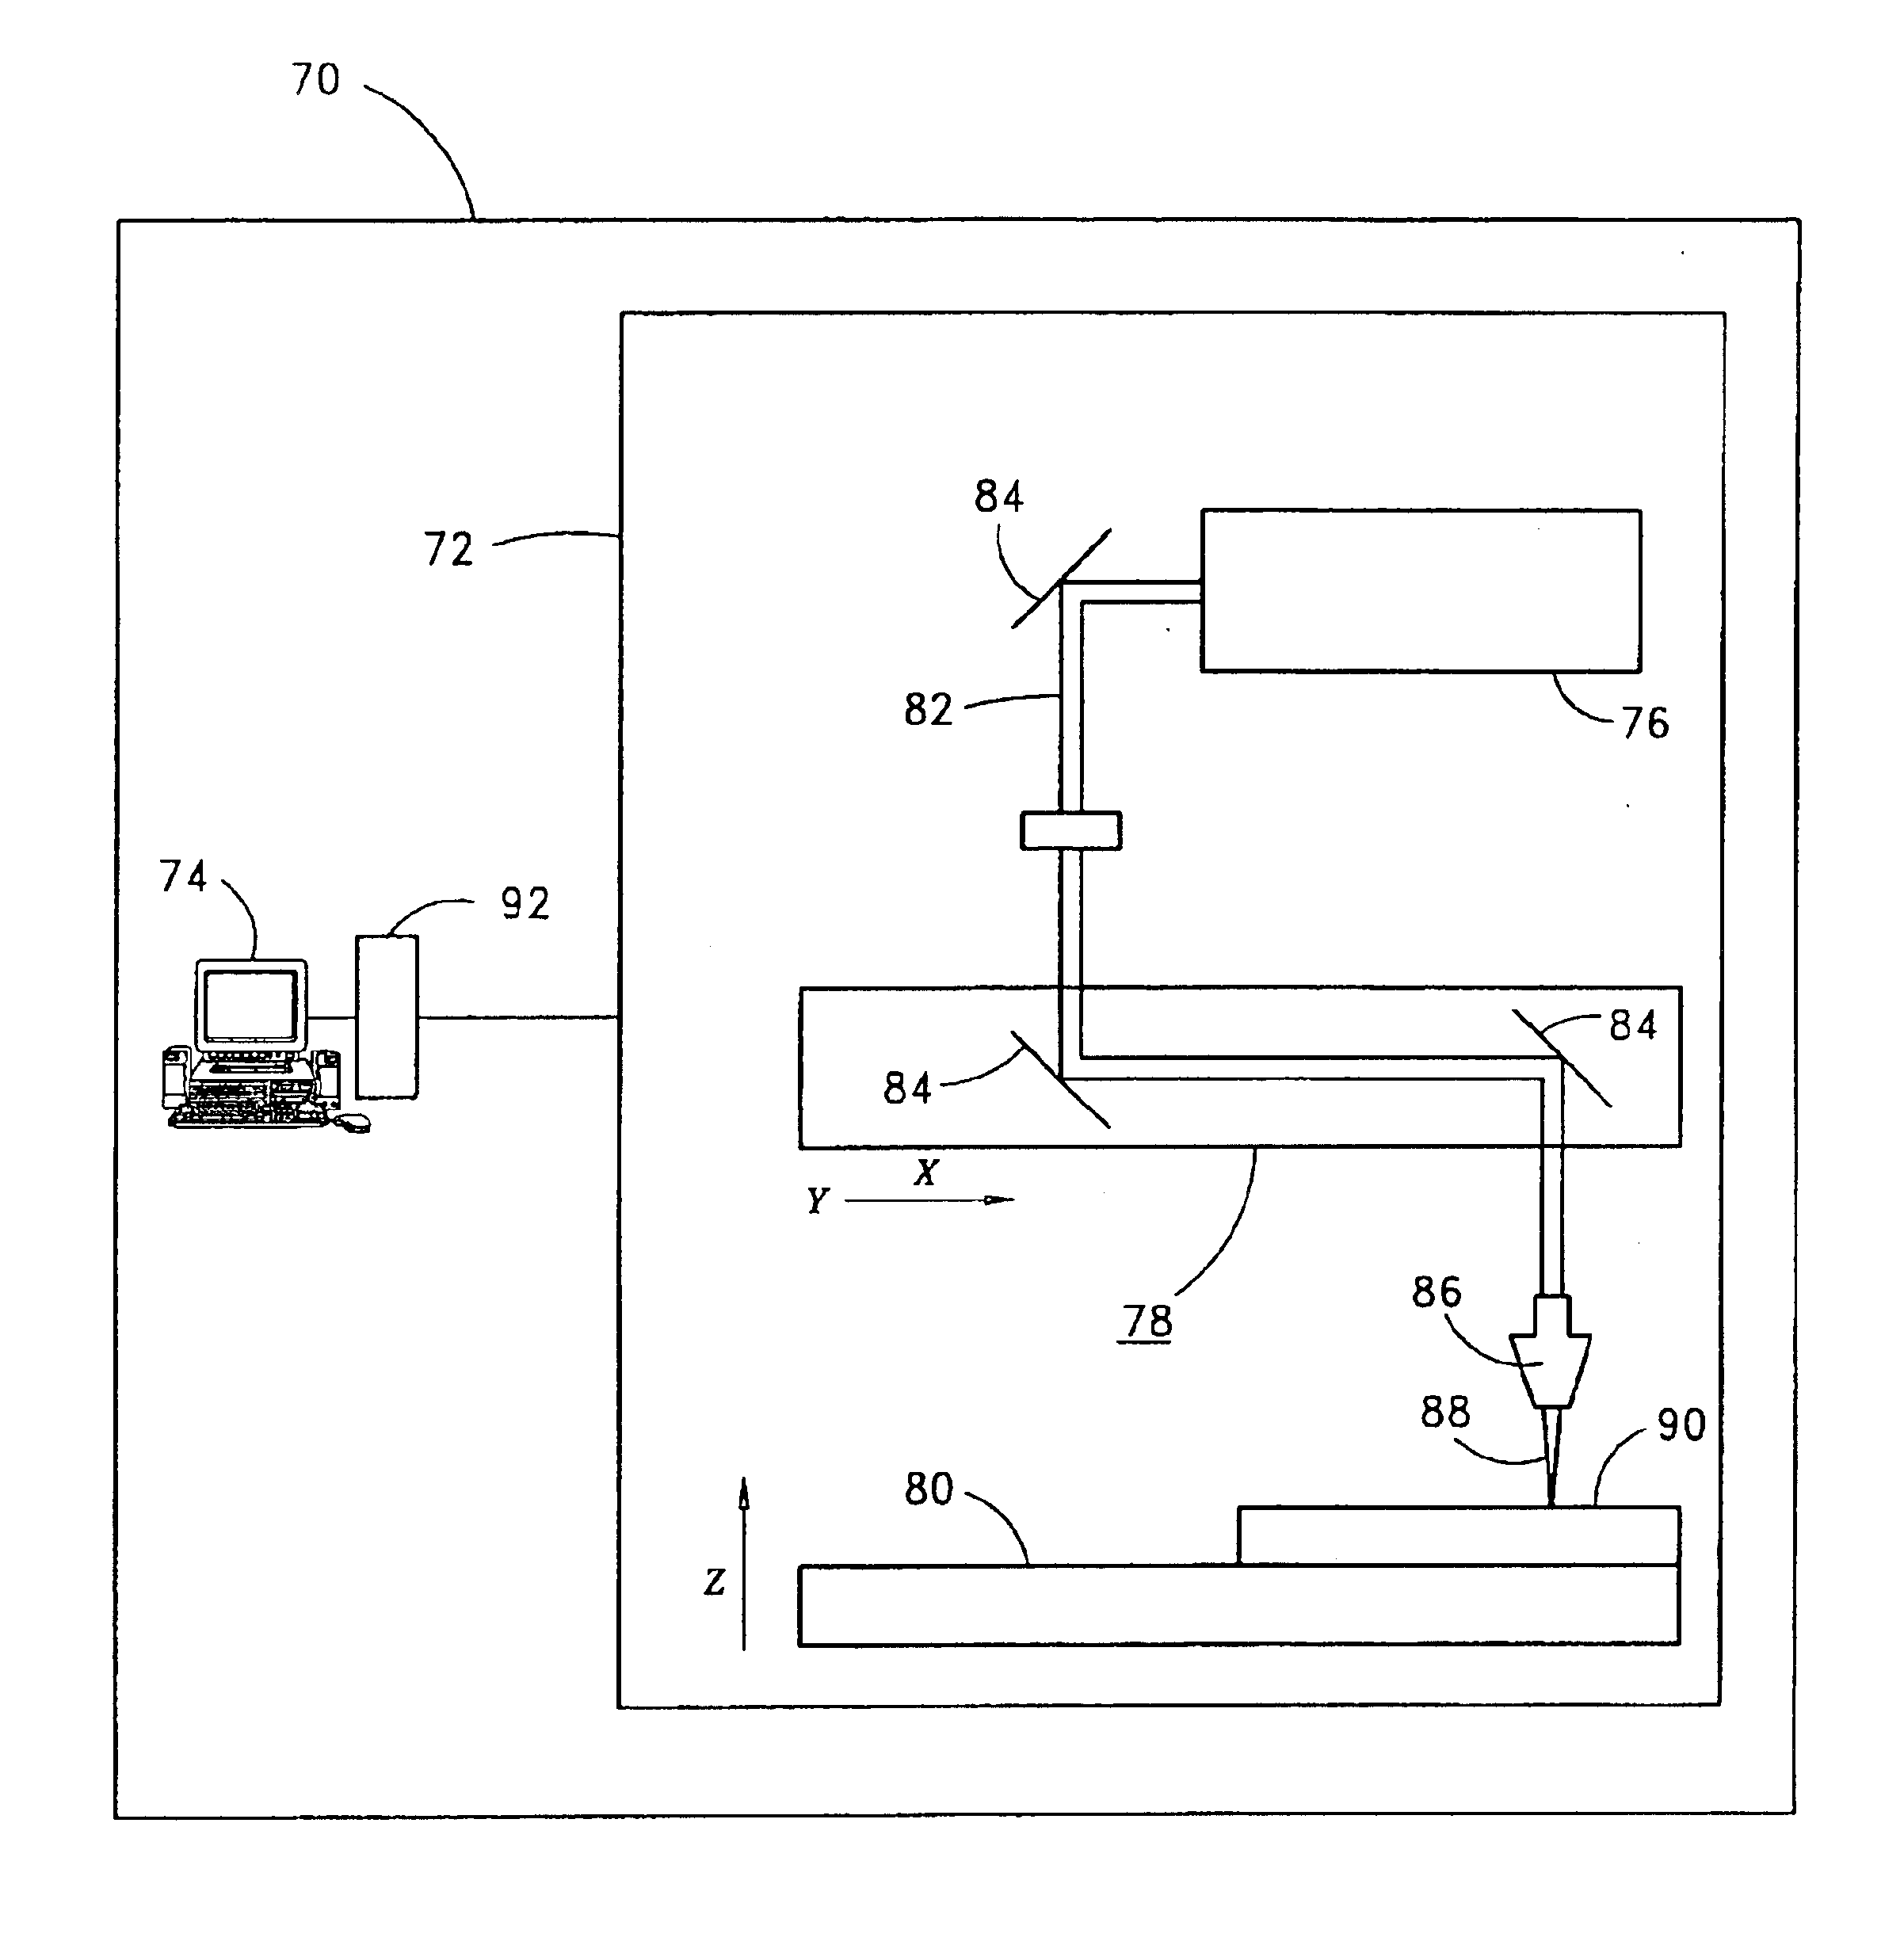 Method of cutting material for use in implantable medical device